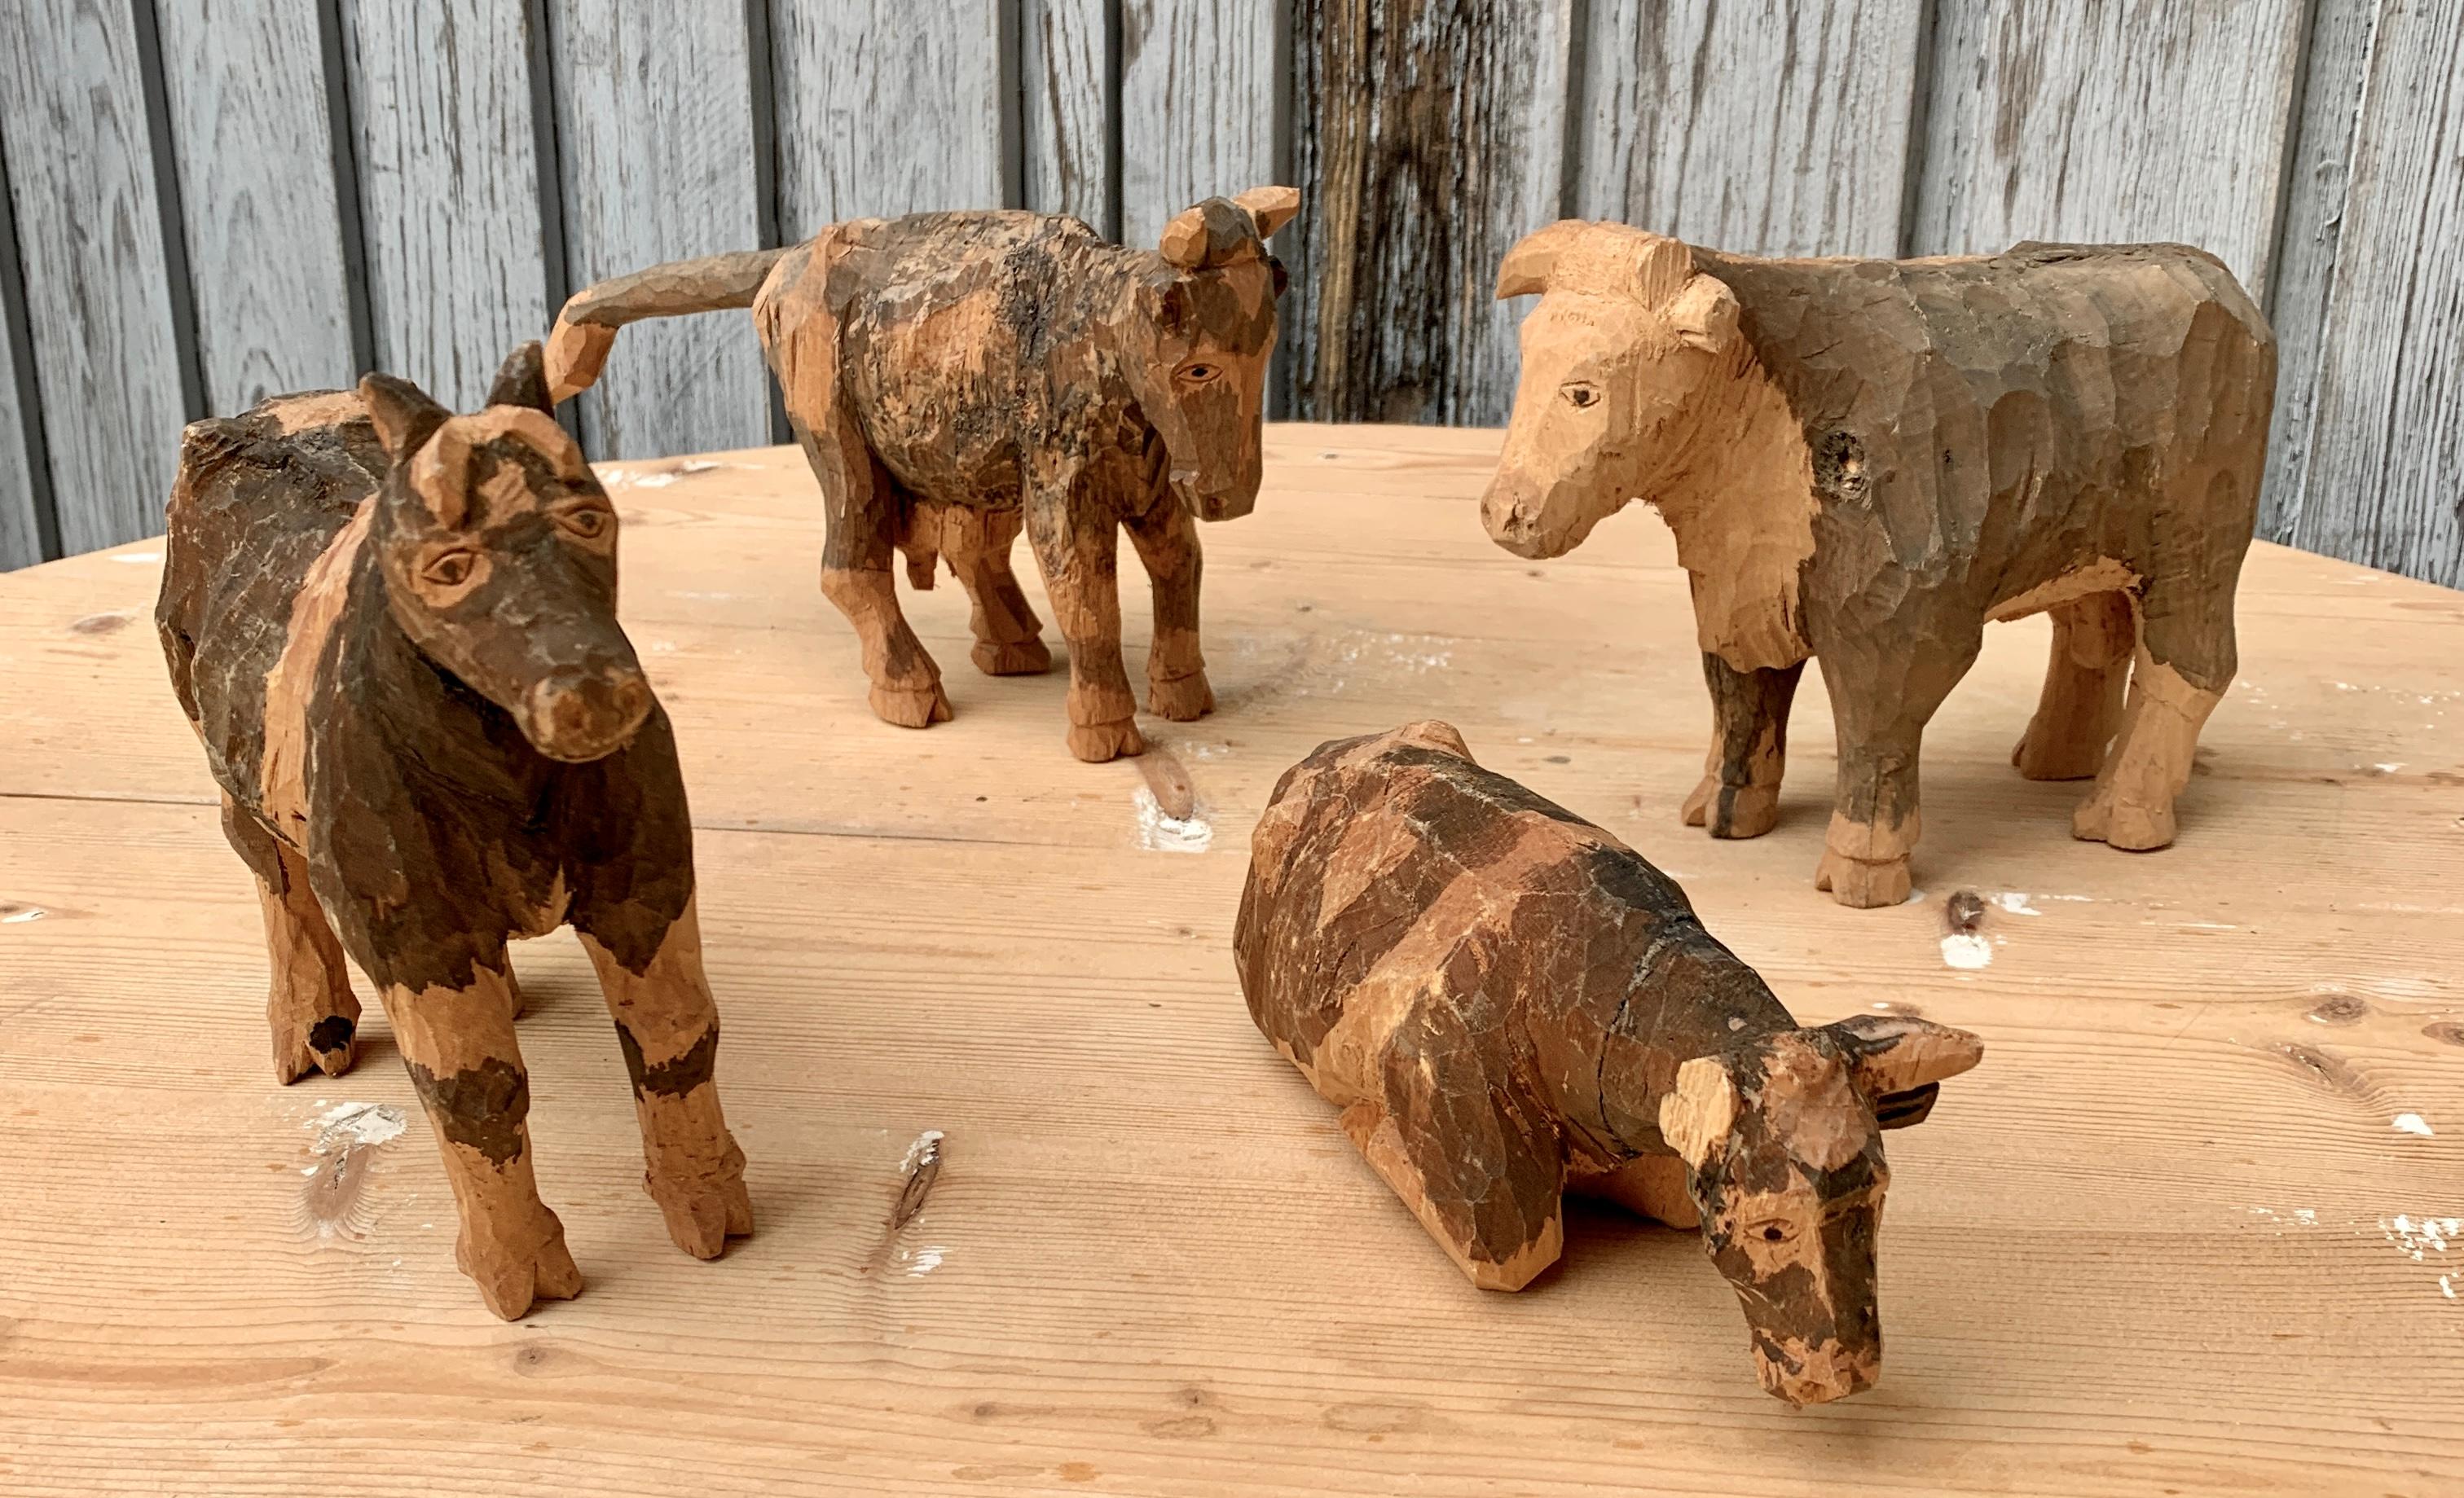 A Swedish set of four wooden carved and painted figures of a bull and three cows from early 20th century. Sweden has a long and well known tradition of folk art wooden carving. It started in the rural class, the so called 